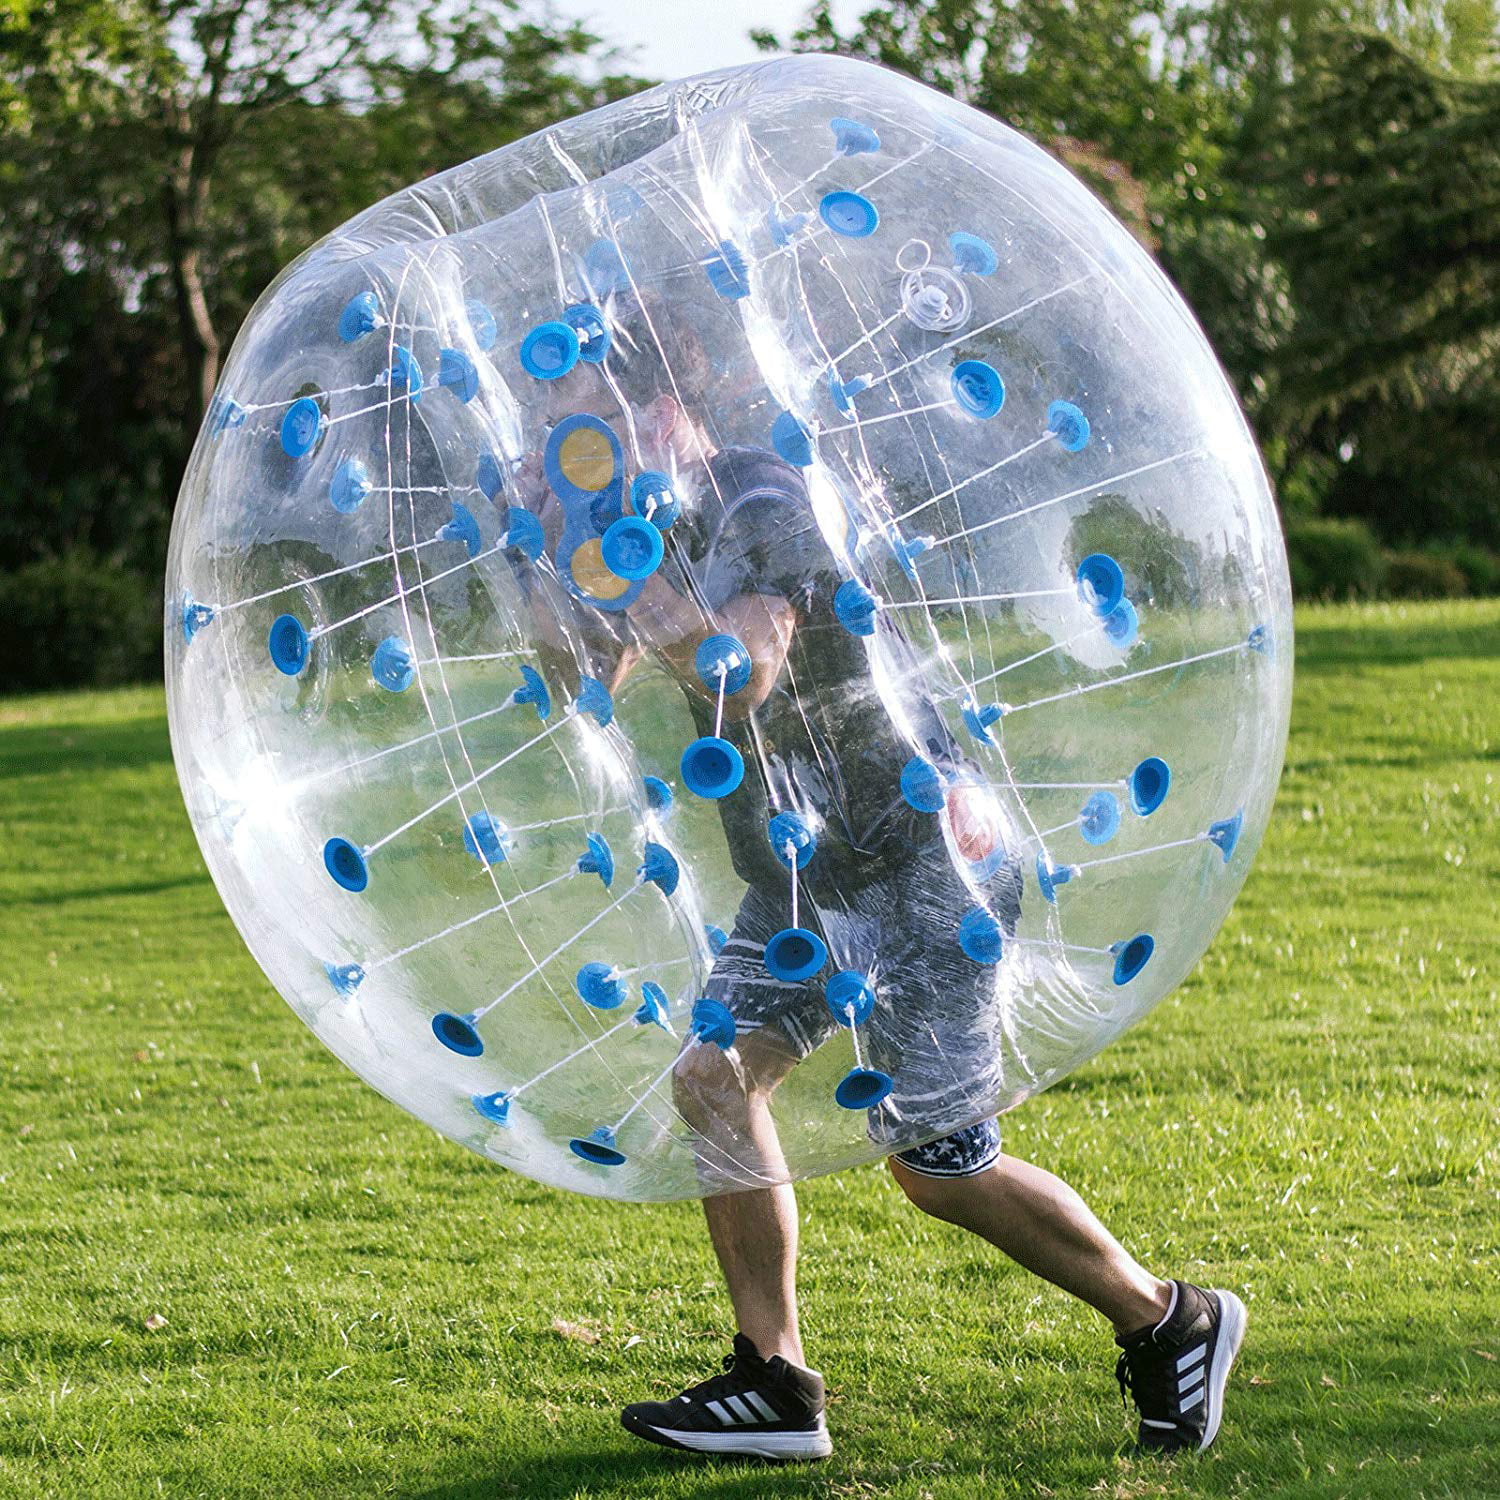 Bumper Bubble Soccer Ball W/Ultra Thick PVC Inflatable Bumper Balls for